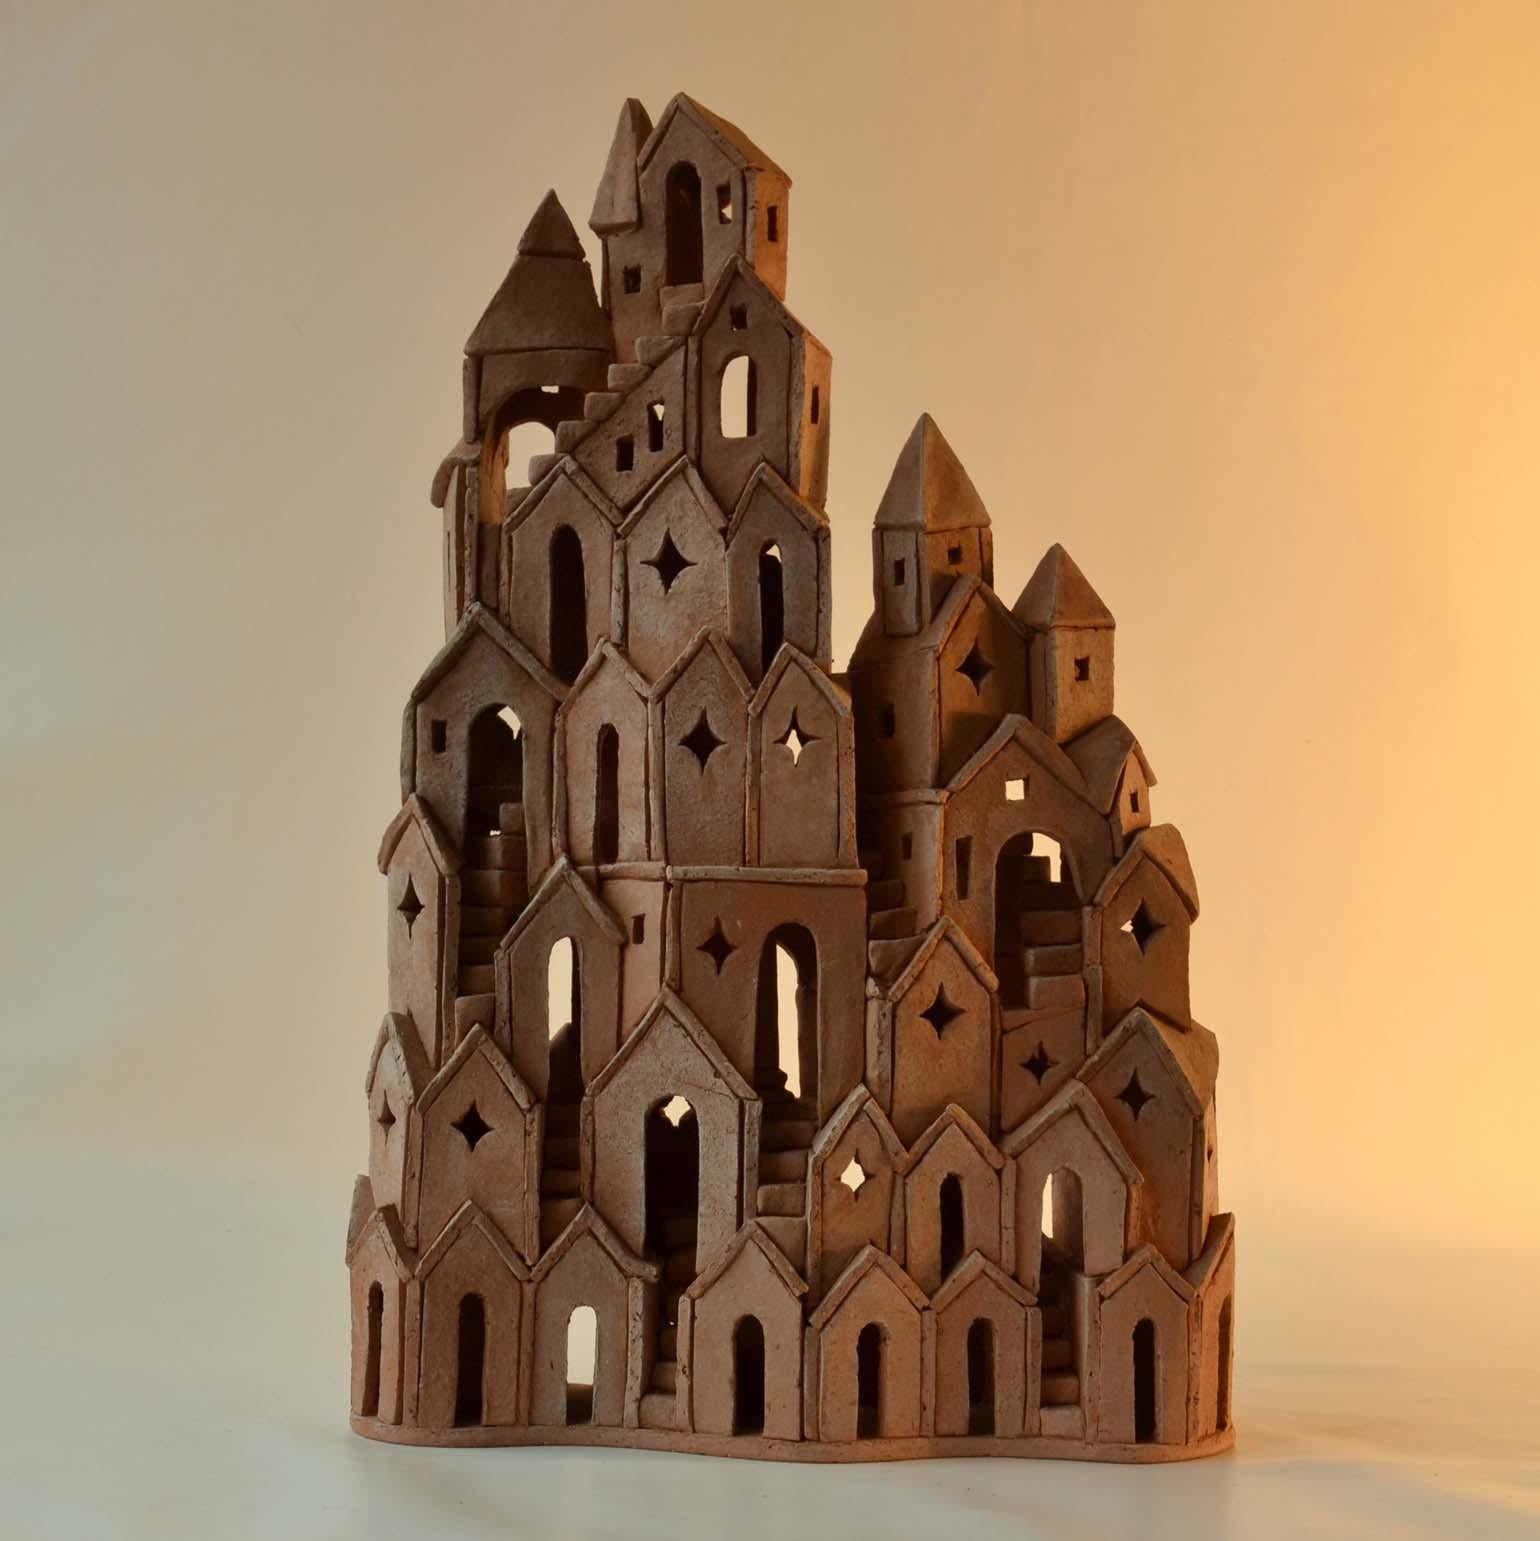 Architectural Surreal Ceramic Tower Sculpture 2 by Dutch Arie Bouter 1995 3